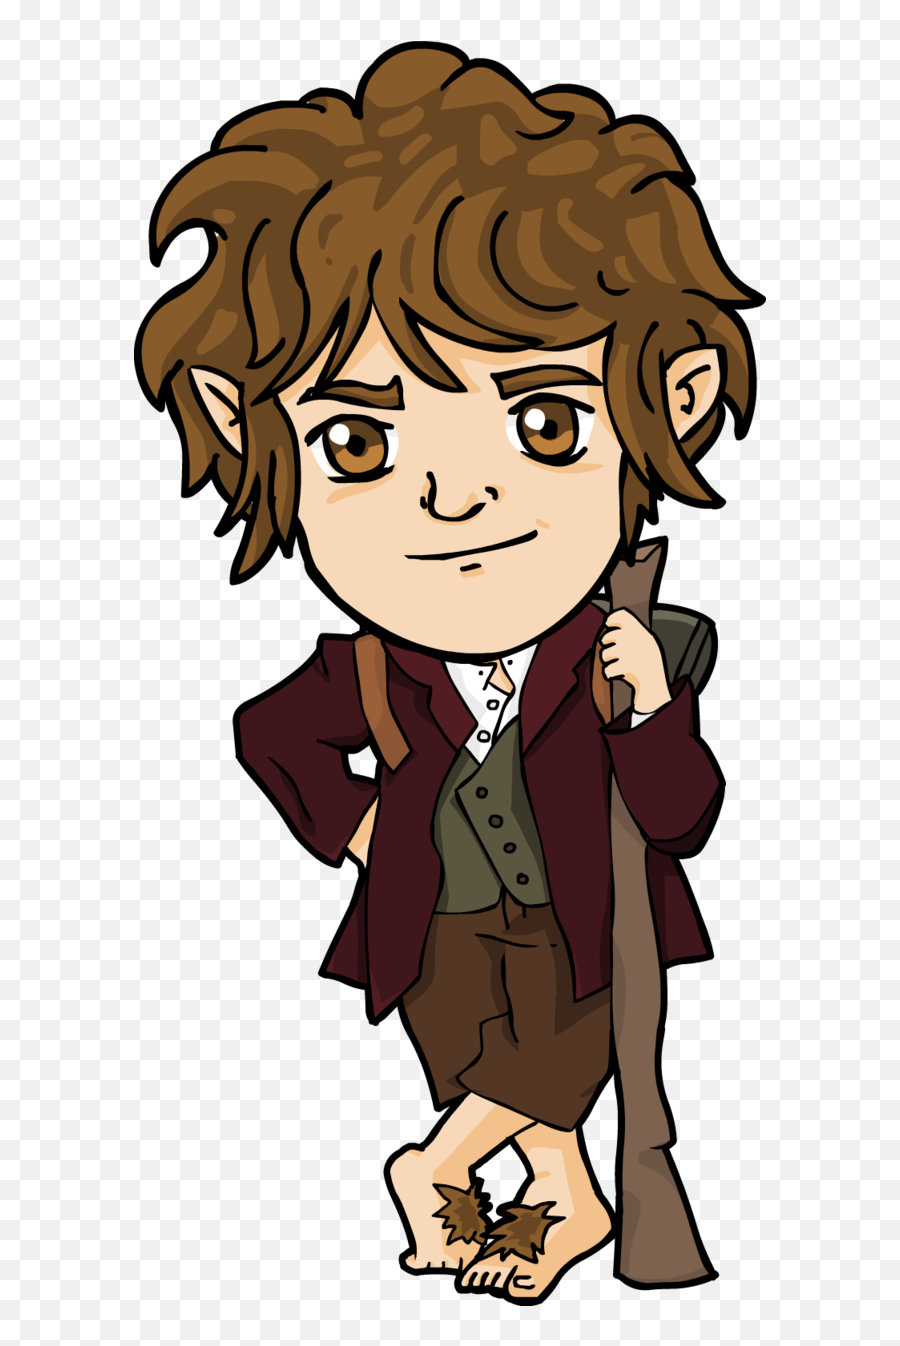 Lord Of The Ring - Hobbit Clip Art Emoji,Lord Of The Rings Emoji